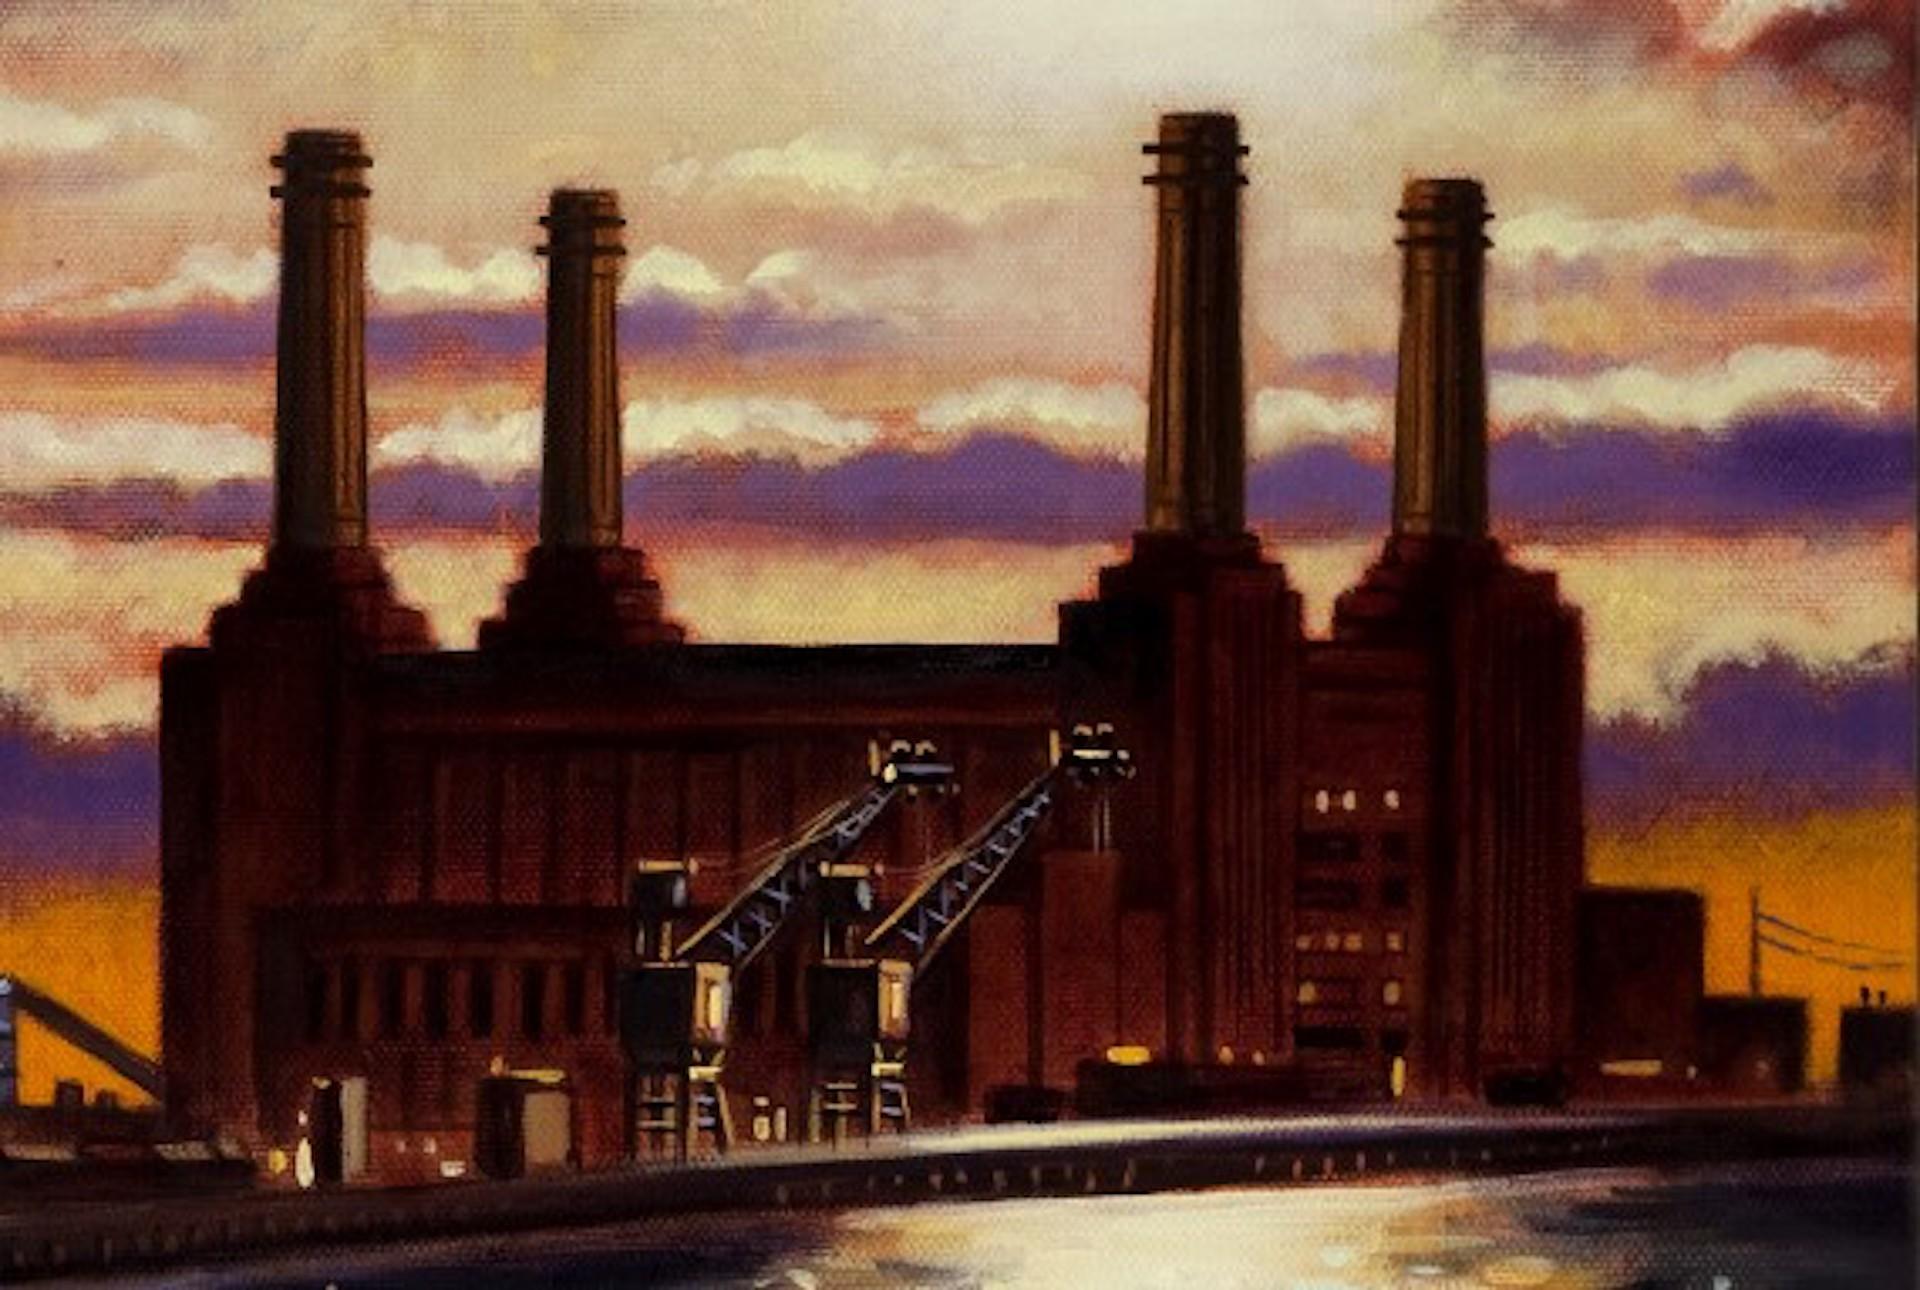 Battersea from Vauxhall Bridge [2012]
Original
Landscape
Oil Paint on Canvas
Canvas size: H:76cm x W:51 cm x D:4cm
Sold Unframed
Please note that insitu images are purely an indication of how a piece may look

Battersea Power Station painted at dusk